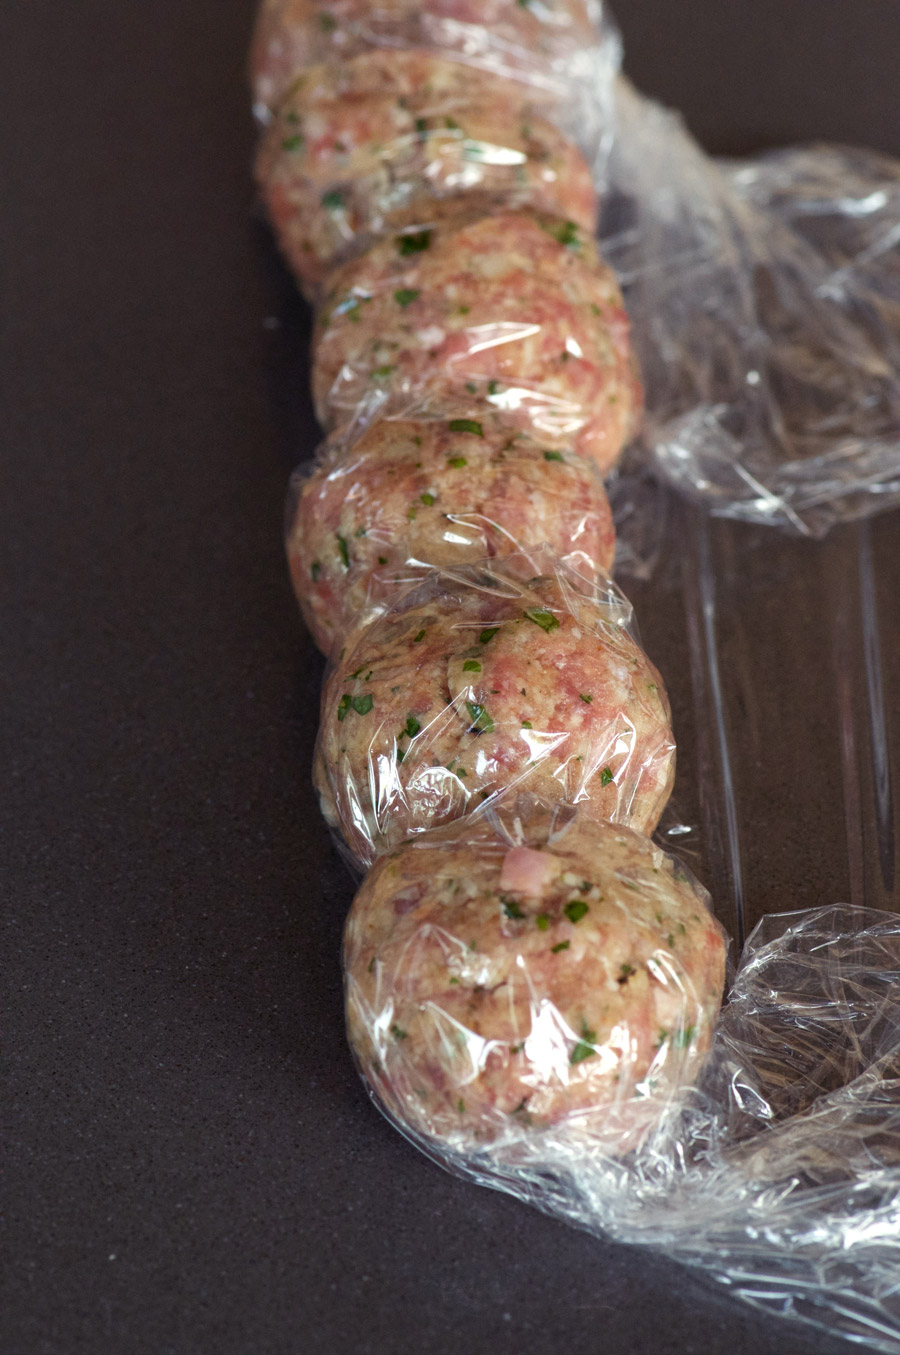 Meatballs getting wrapped for the freezer as part of meal prep